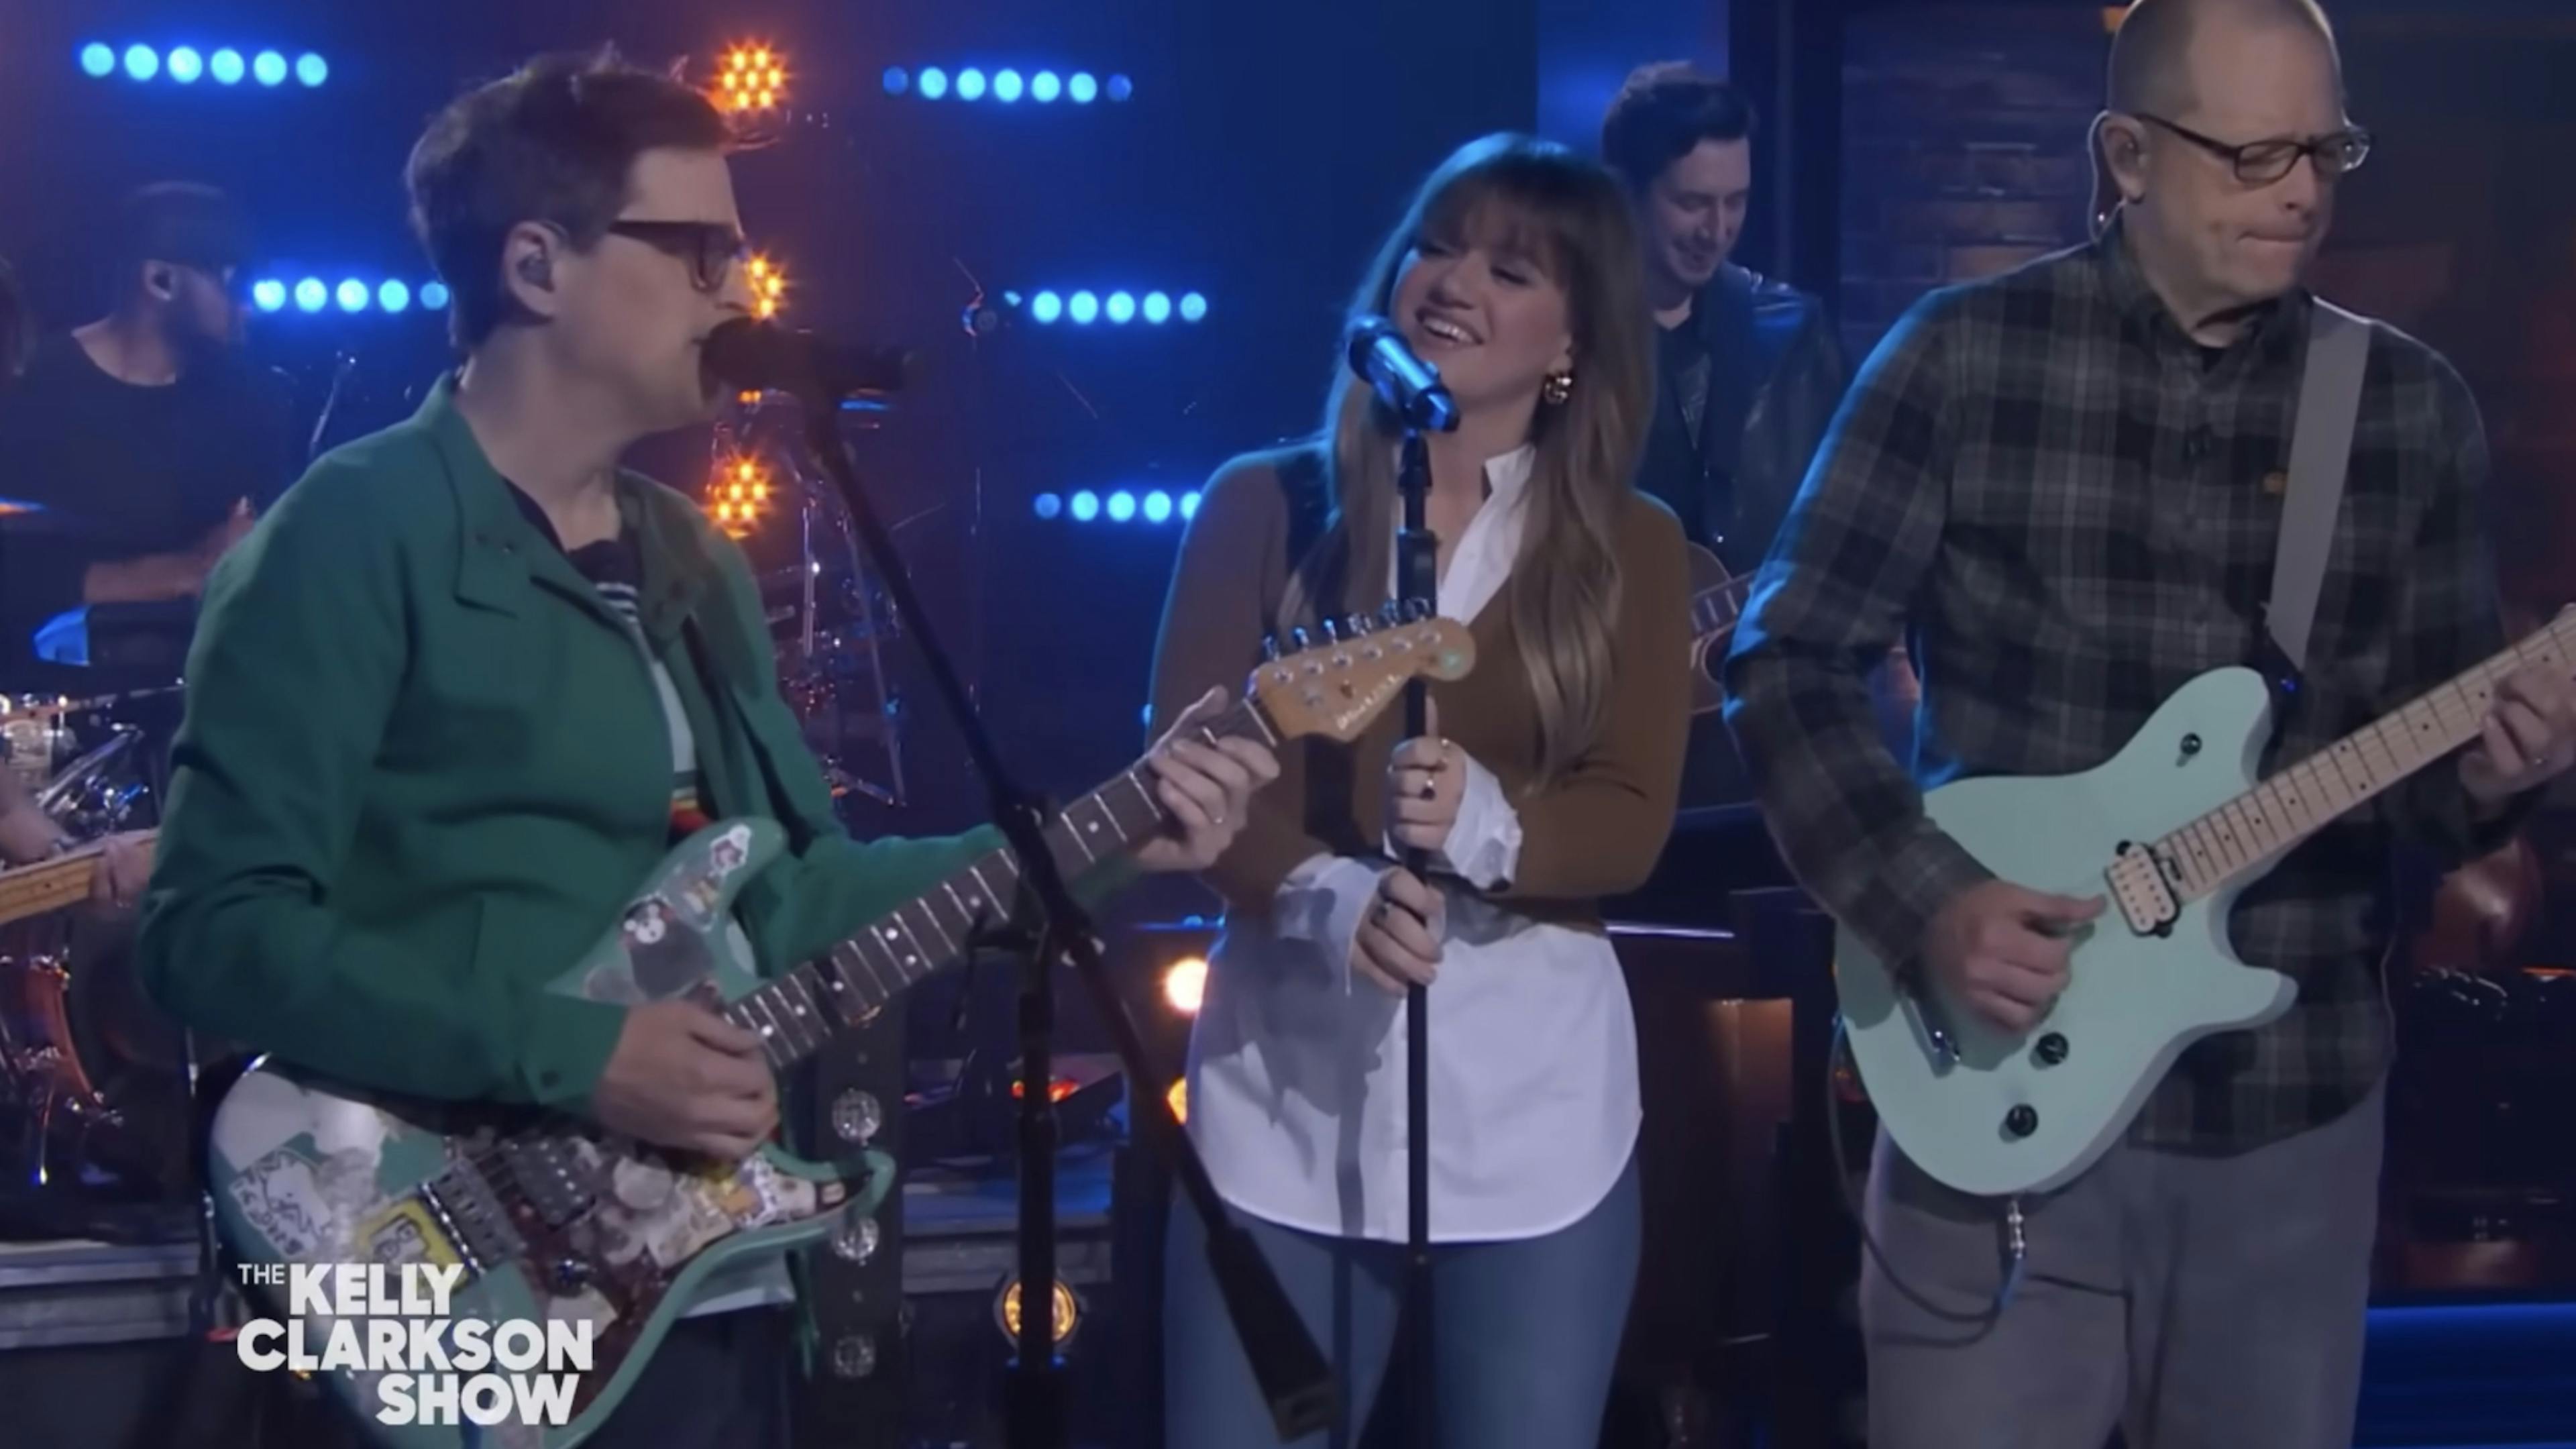 Watch Kelly Clarkson perform Say It Ain’t So with Weezer